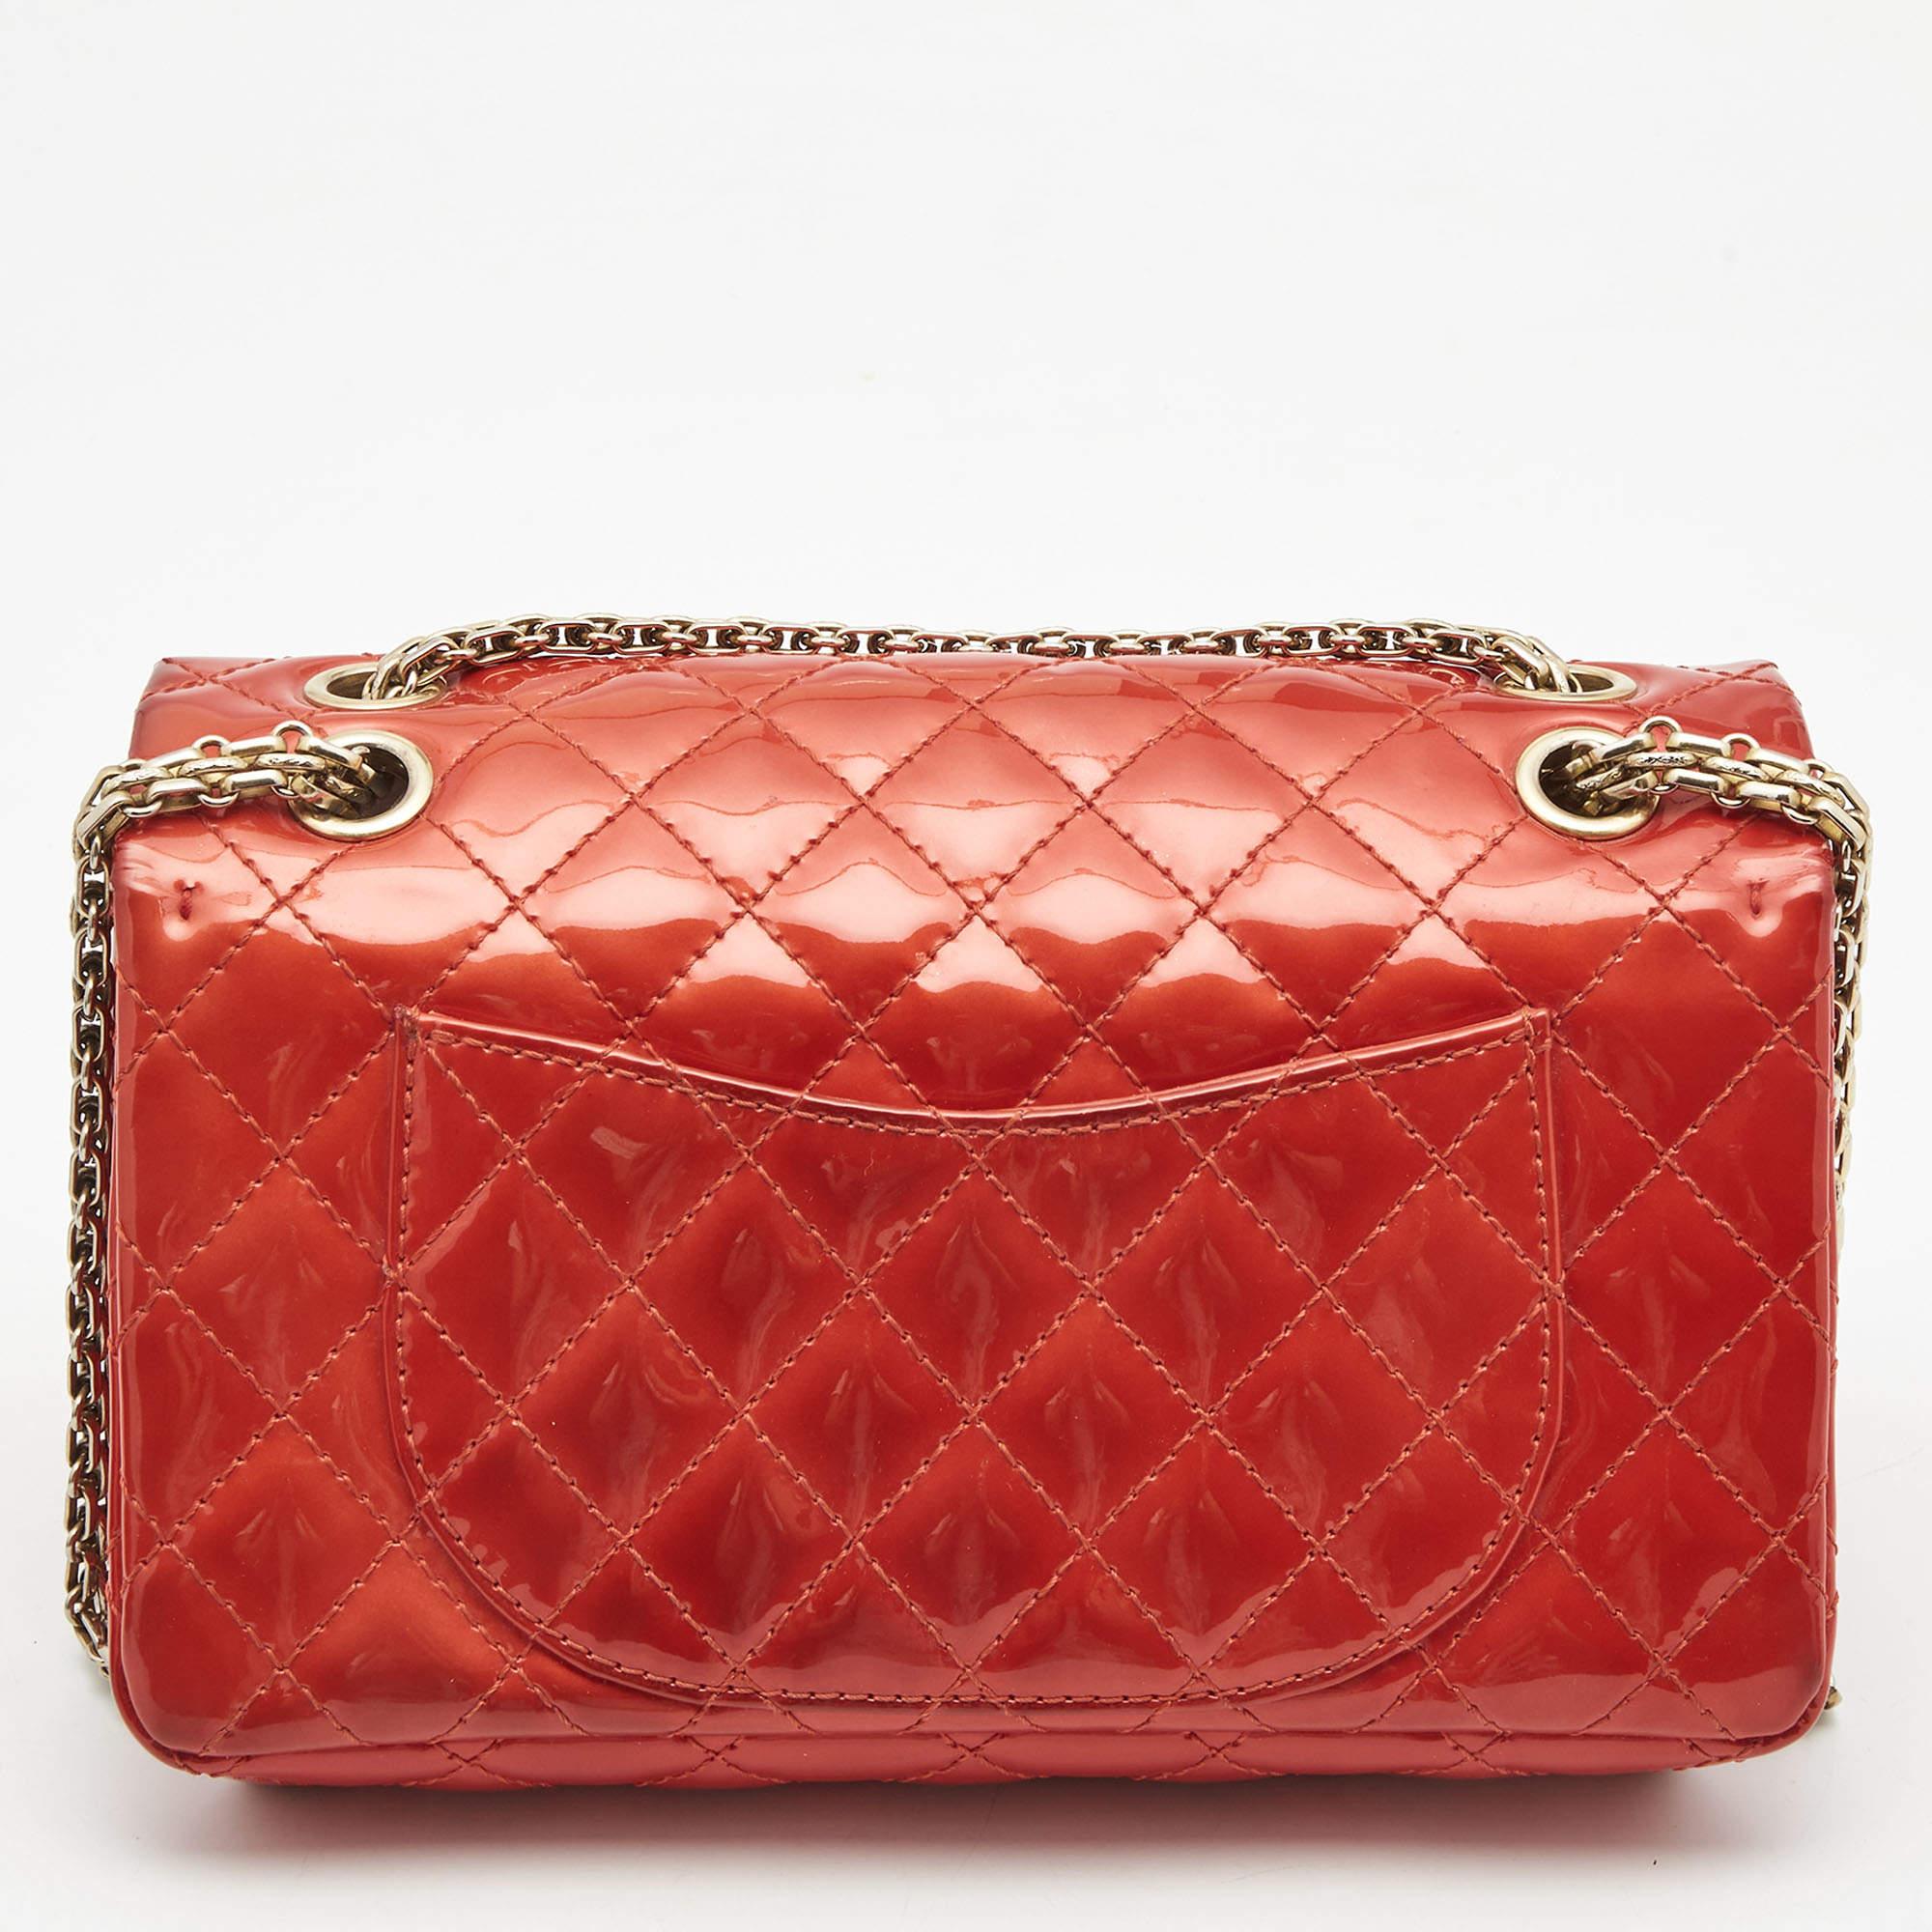 Chanel Red Patent Leather Reissue Double Compartment Flap Bag 12